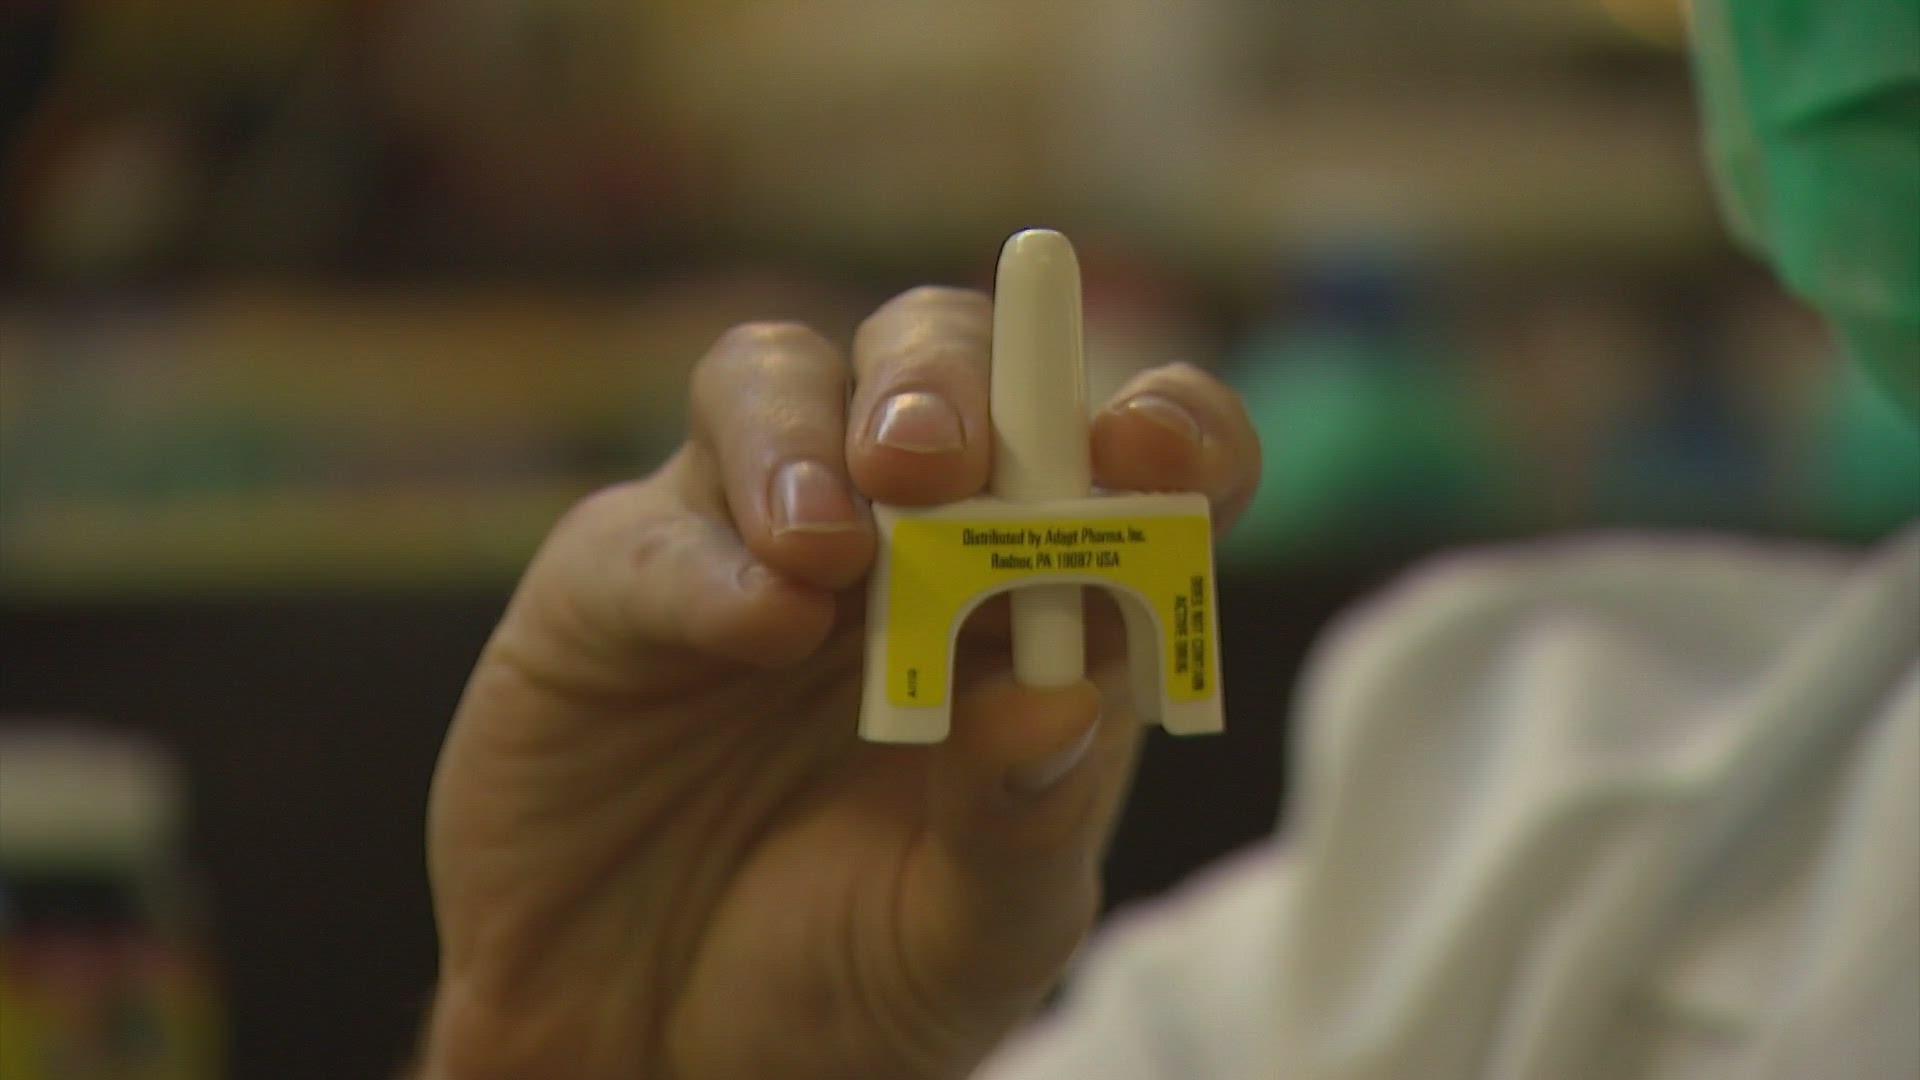 Doctors say readily available Narcan could be the boost Washington needs against the opioid epidemic.